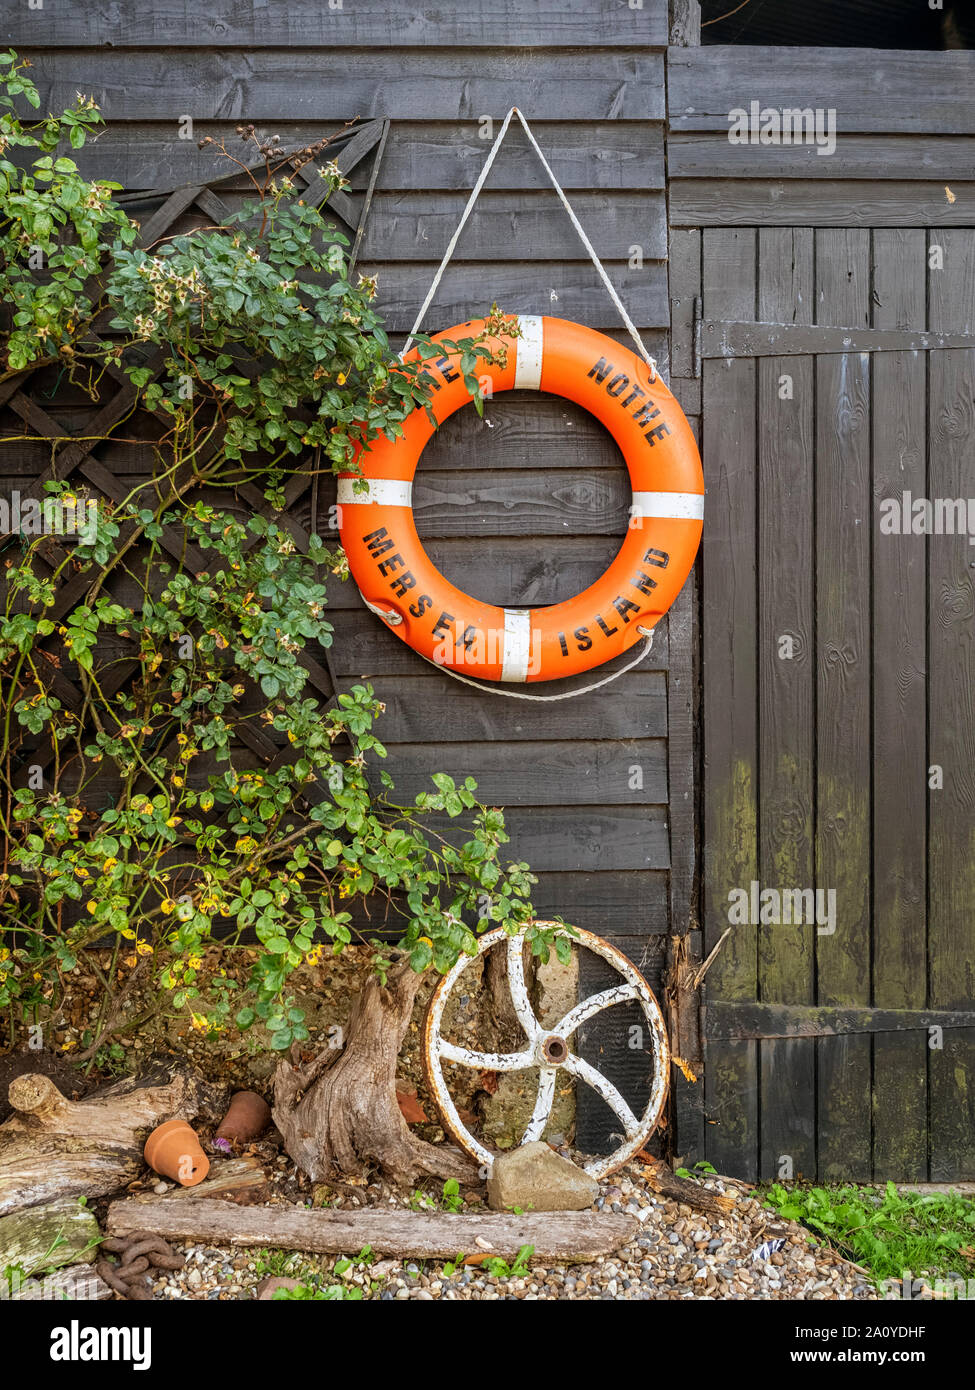 WEST MERSEA, ESSEX,UK - AUGUST 31, 2018:  Orange Life buoy on old shed Stock Photo